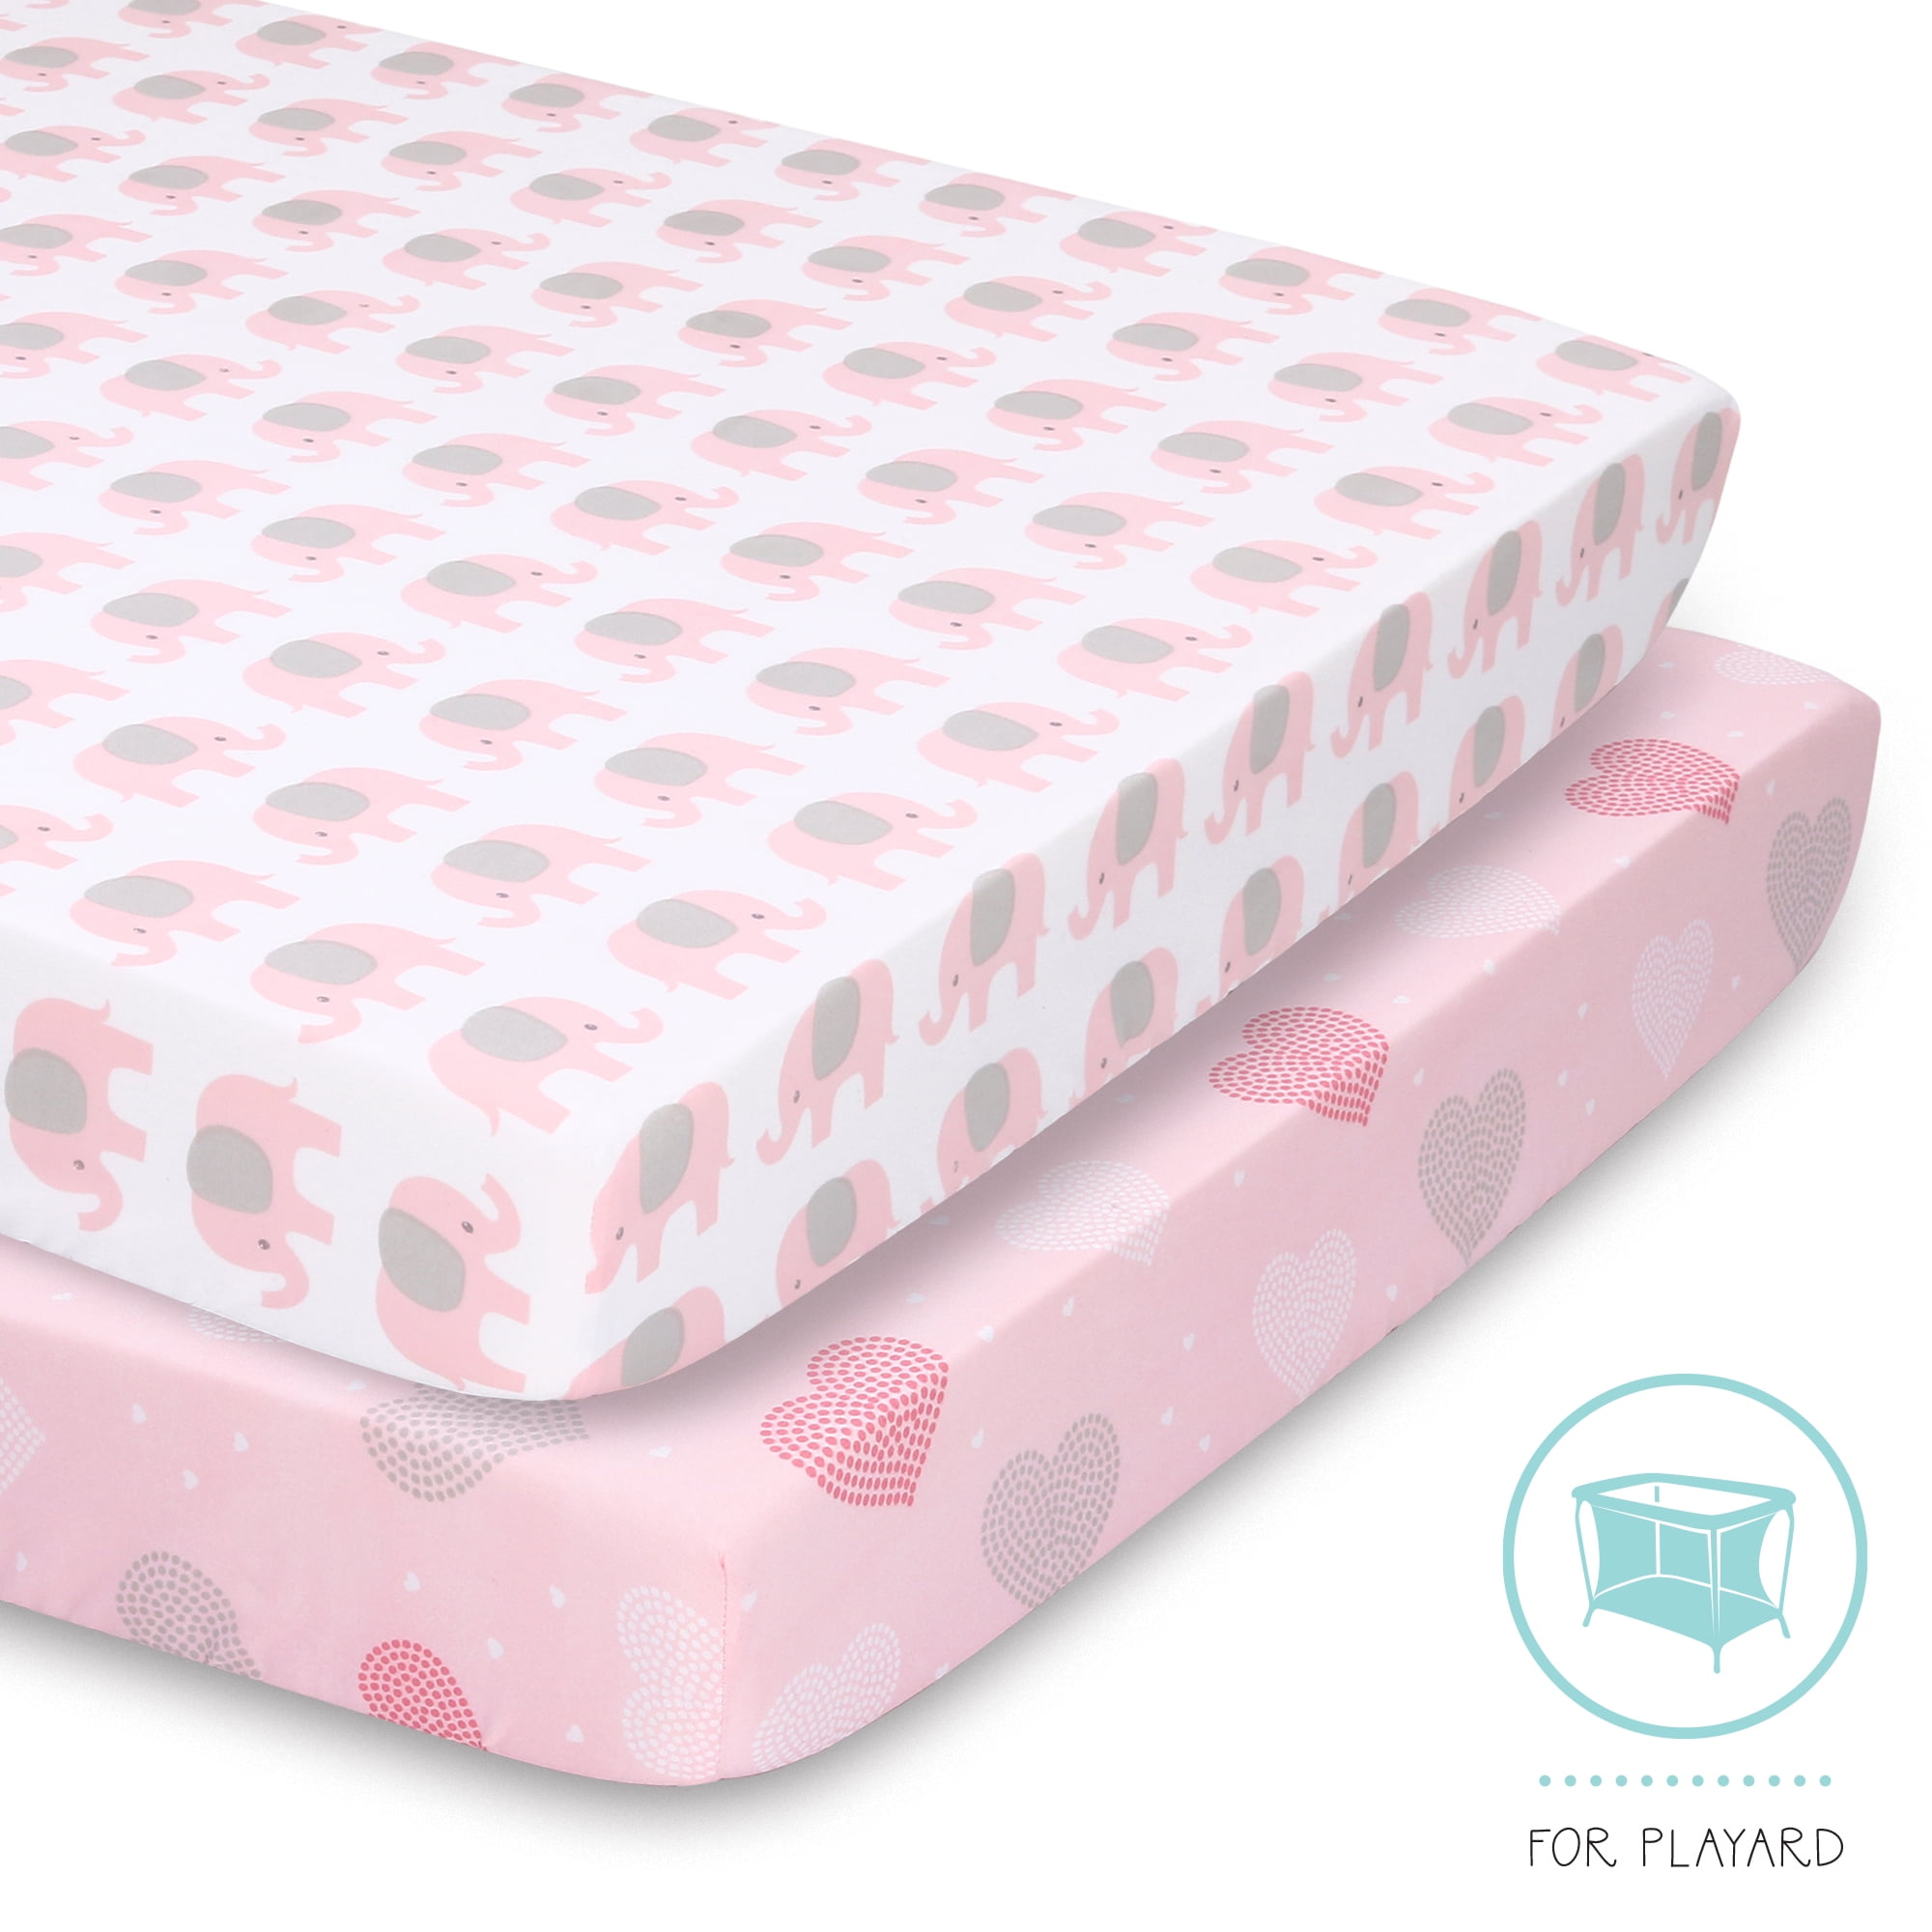 Fits Perfectly Any Standard Playard Mattress up to 3 Thick Vintage Roses Pack N Play Playard Sheet Set-2 Pack 100% Premium Cotton Flannel,Super Soft 